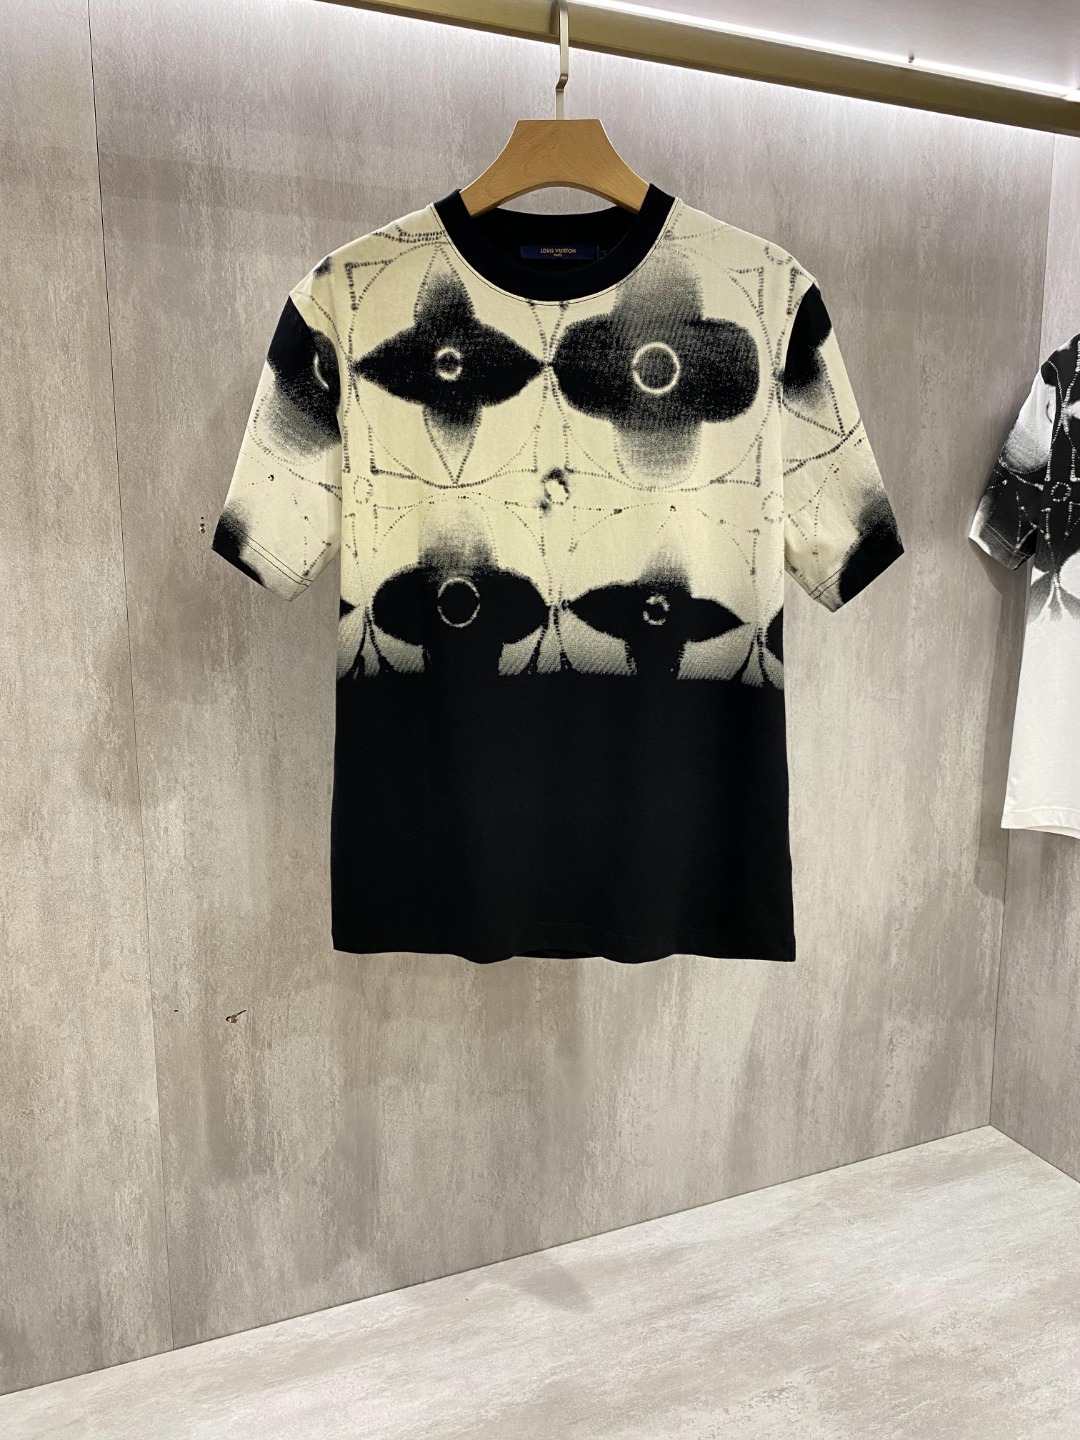 Louis Vuitton Cheap
 Clothing T-Shirt Black White Printing Unisex Combed Cotton Spring/Summer Collection Short Sleeve